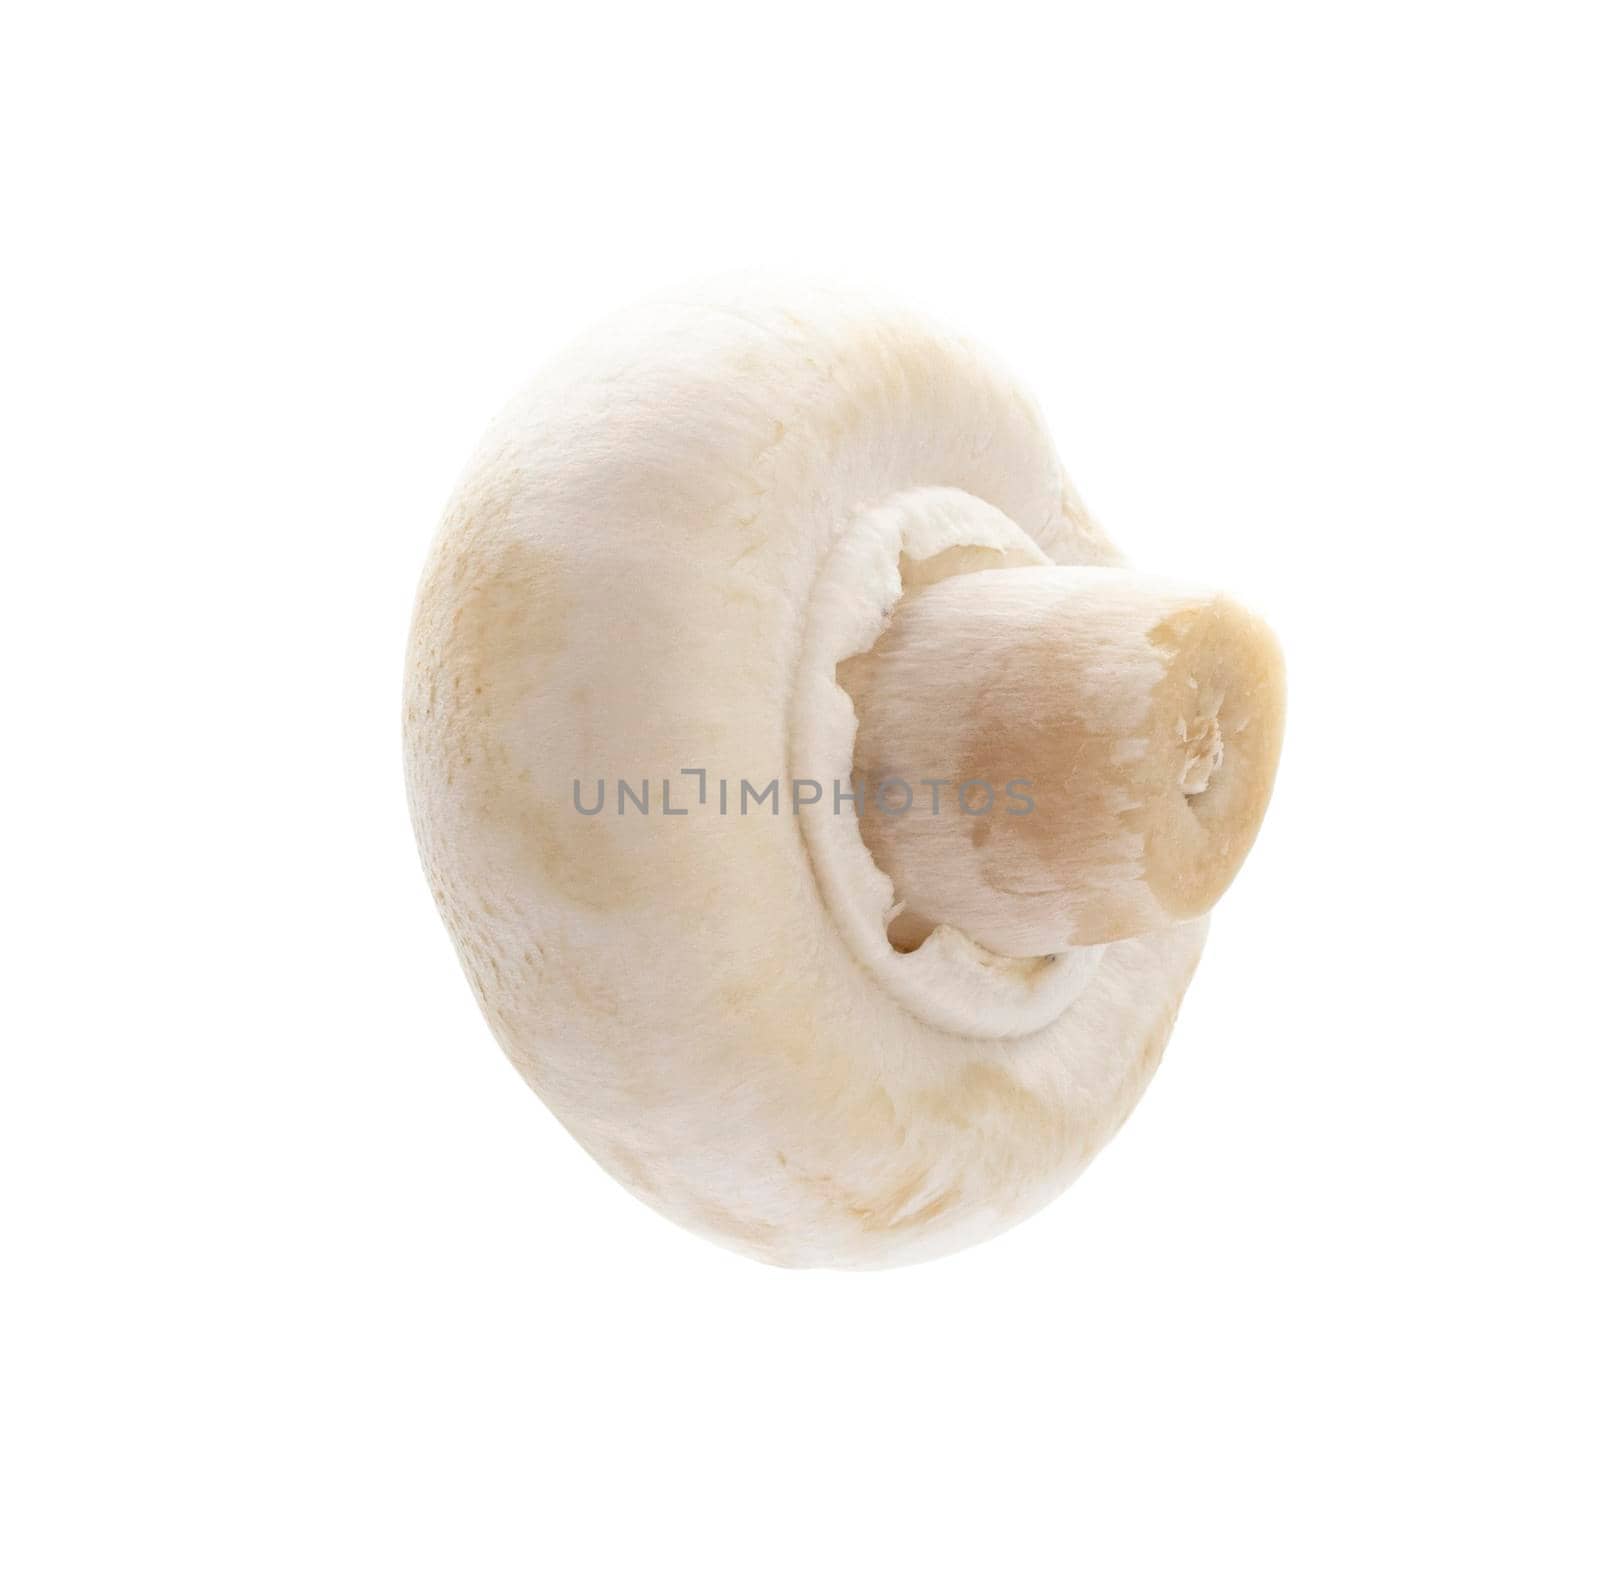 champignon isolated on a white background.